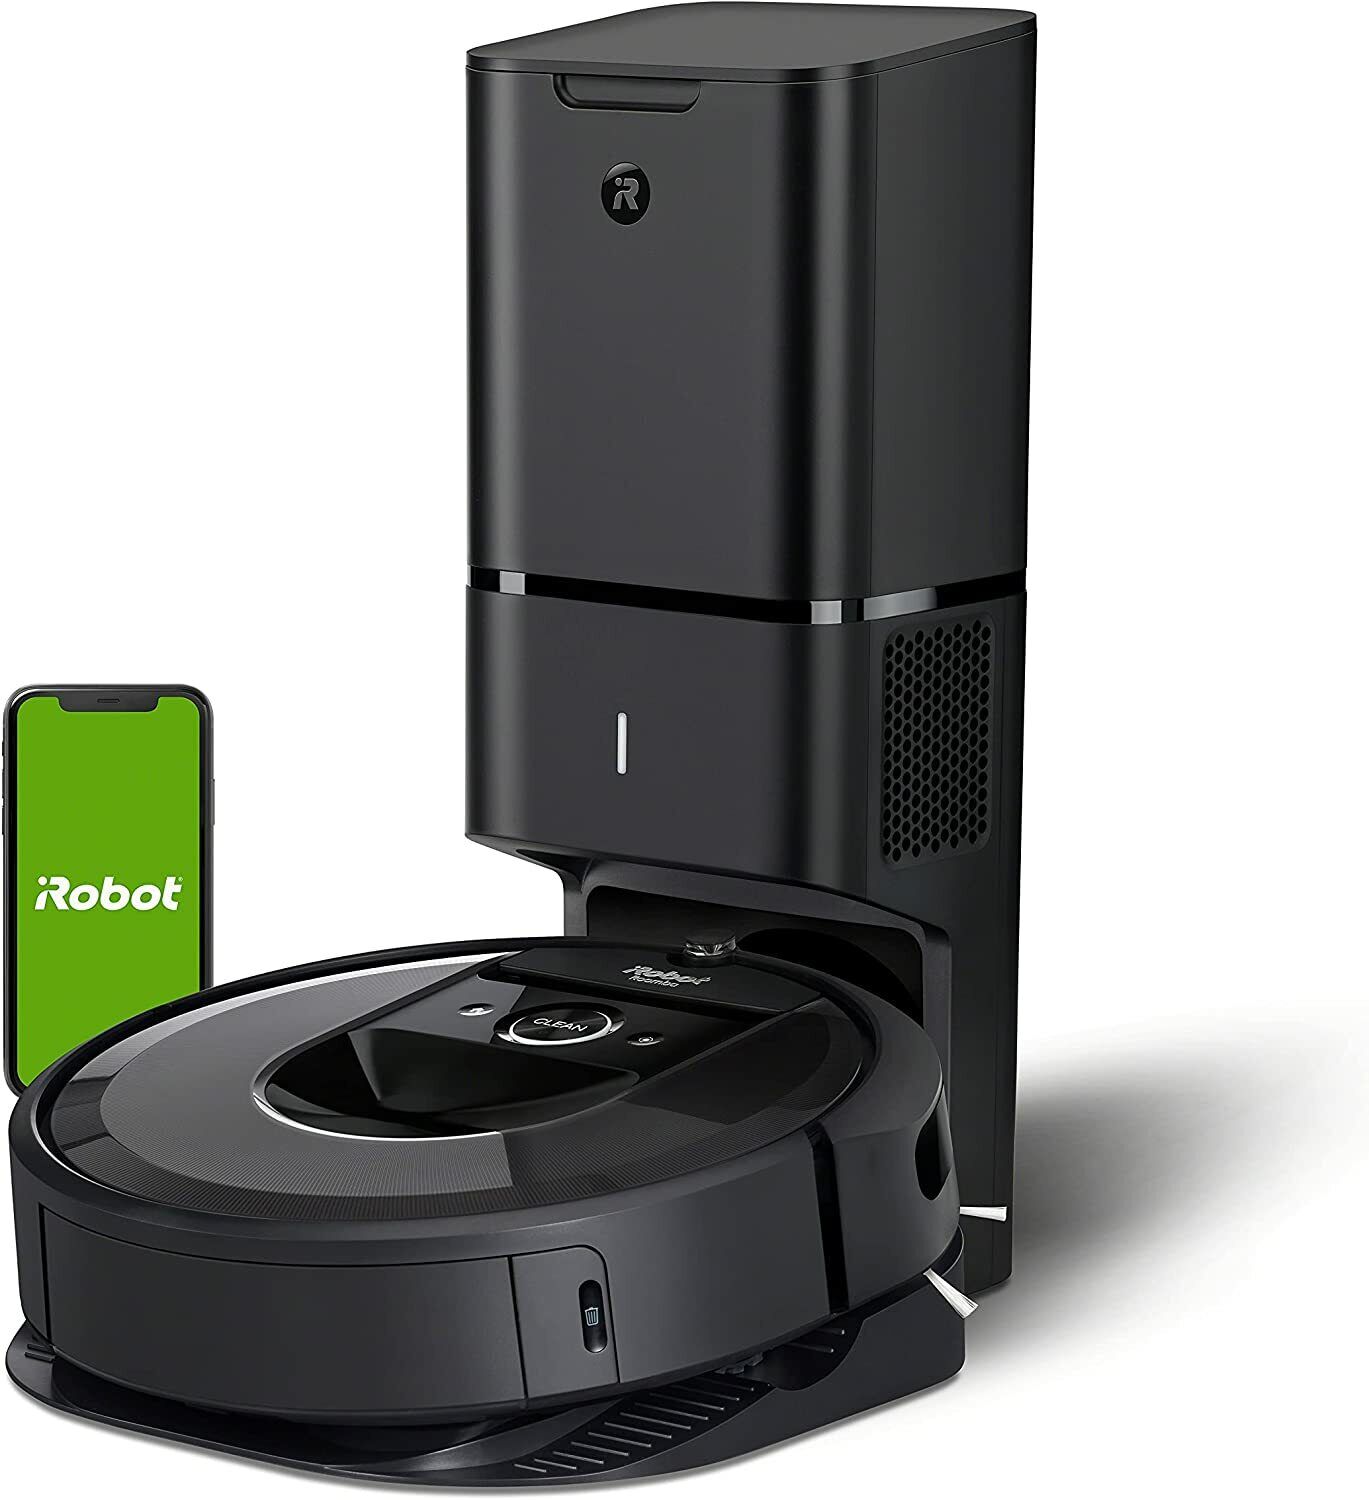 (Certified Refurbished) iRobot Roomba i7+ Self-Emptying Vacuum Cleaning Robot (7550) $350 + Free Shipping